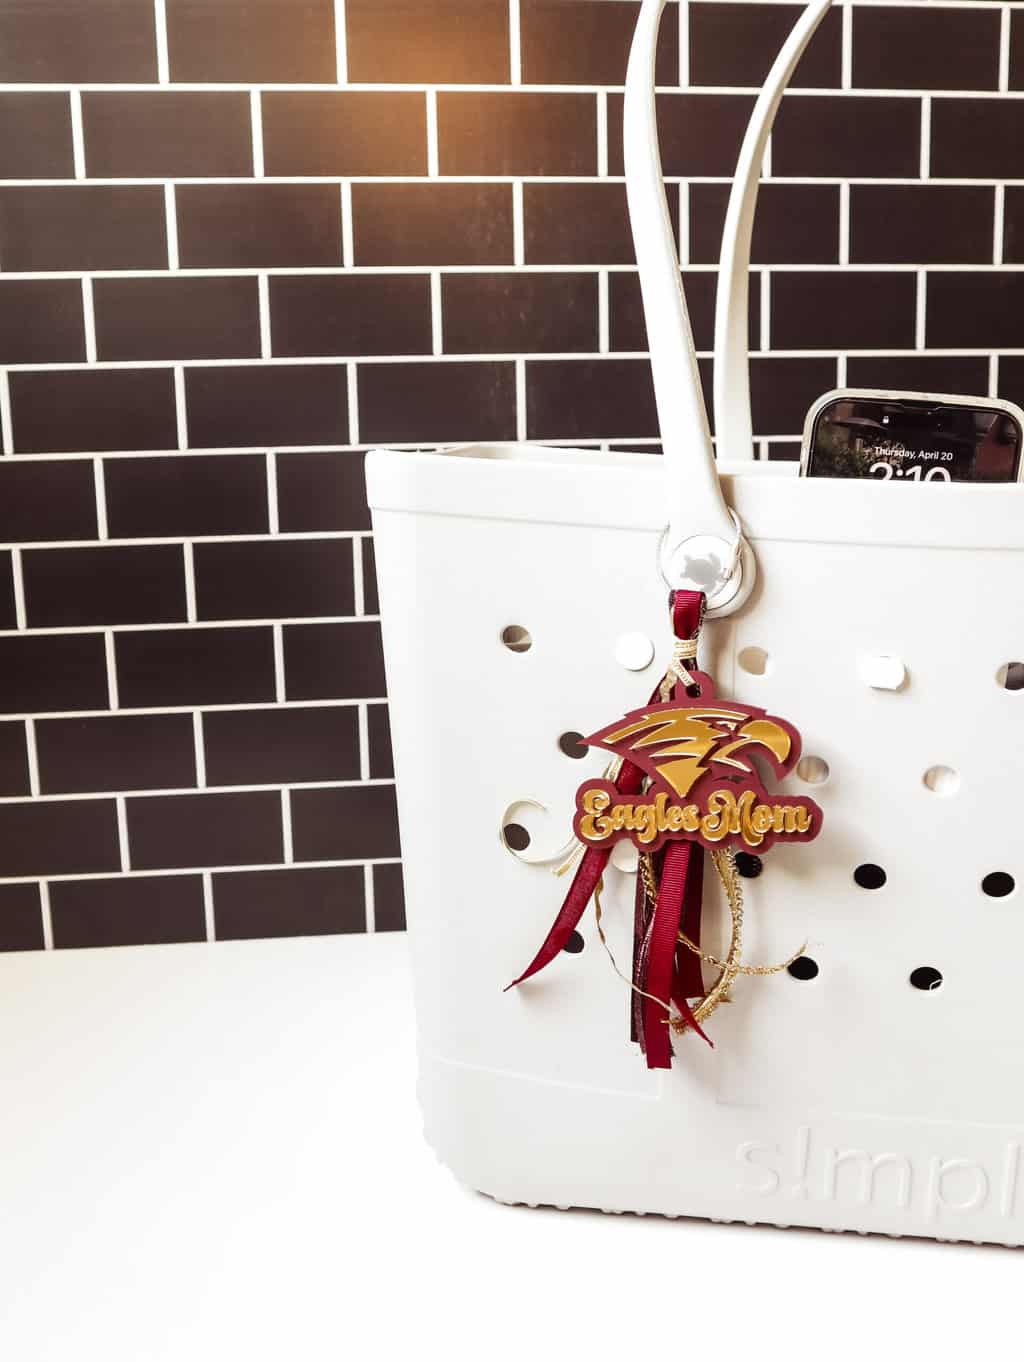 10 Must-Have Bogg Bag Accessories for a Truly Customized Look